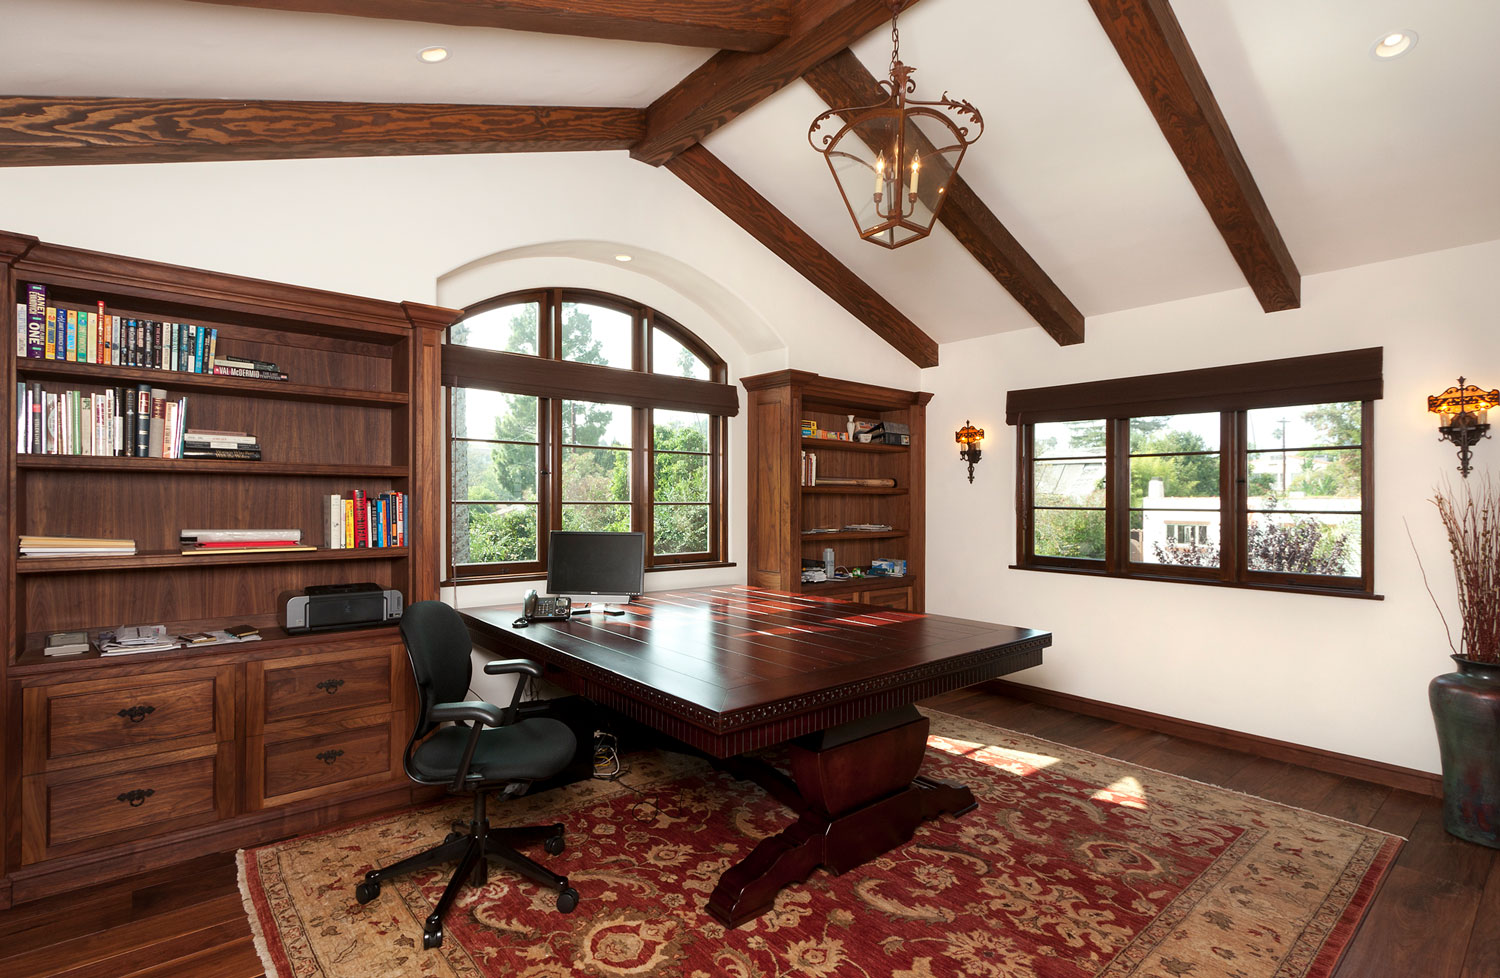 13-spanish-style-home-office-built-in-bookcases-gary-drake-general-contractor.jpg